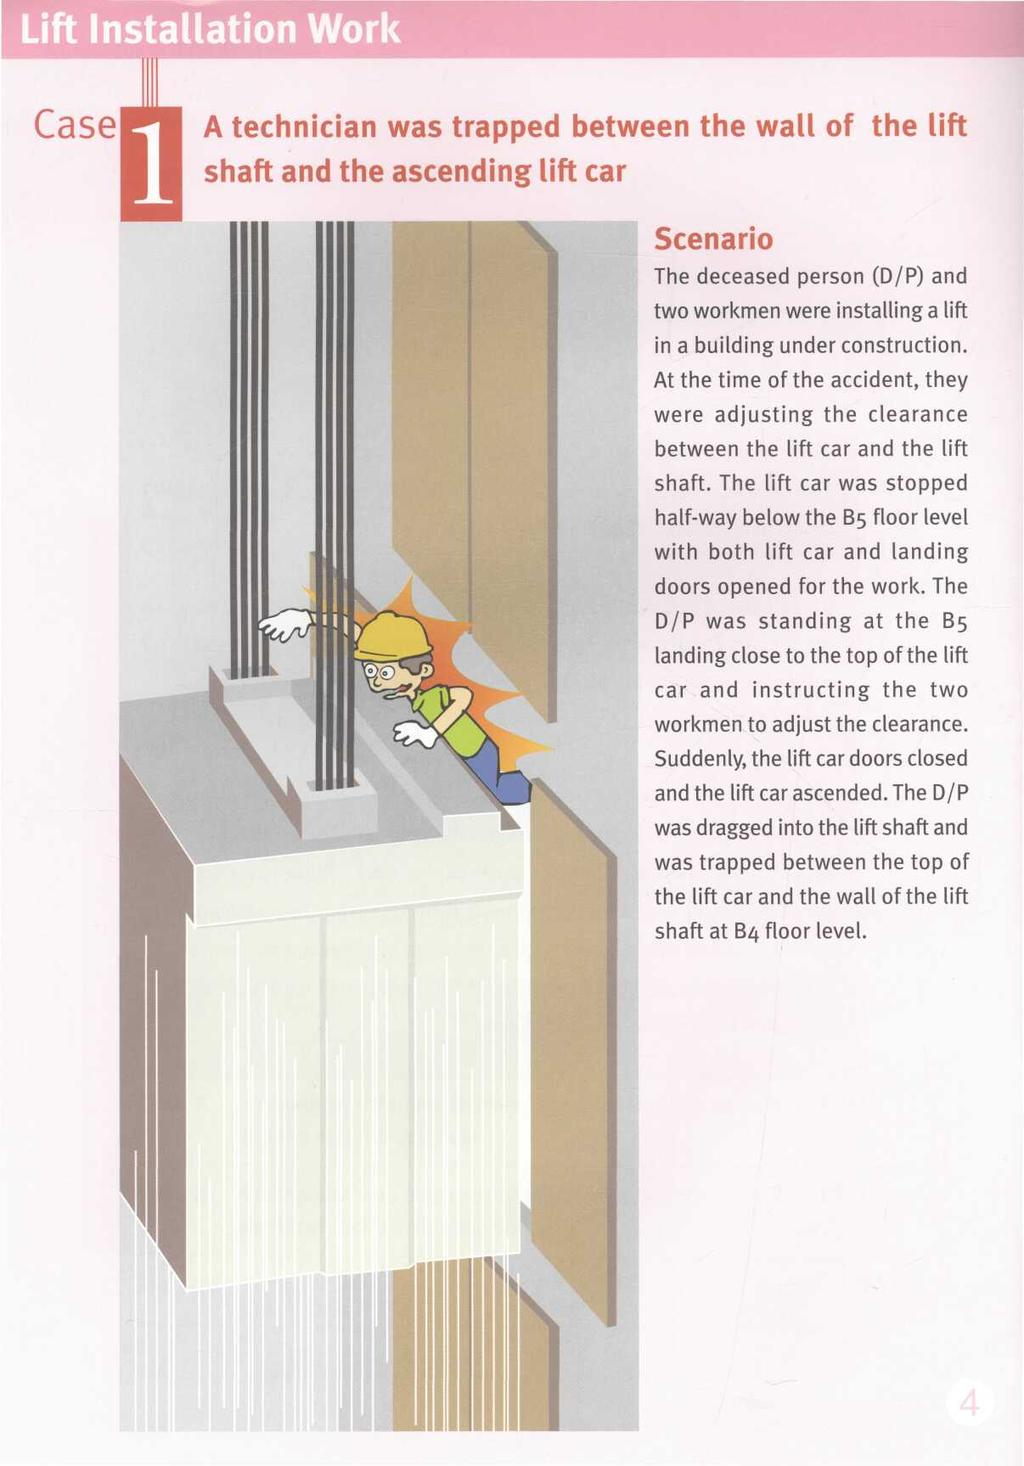 Lift Installation Work Case A technician was trapped between the wall of the lift shaft and the ascending lift car Scenario The deceased person (D/P) and two workmen were installing a lift in a